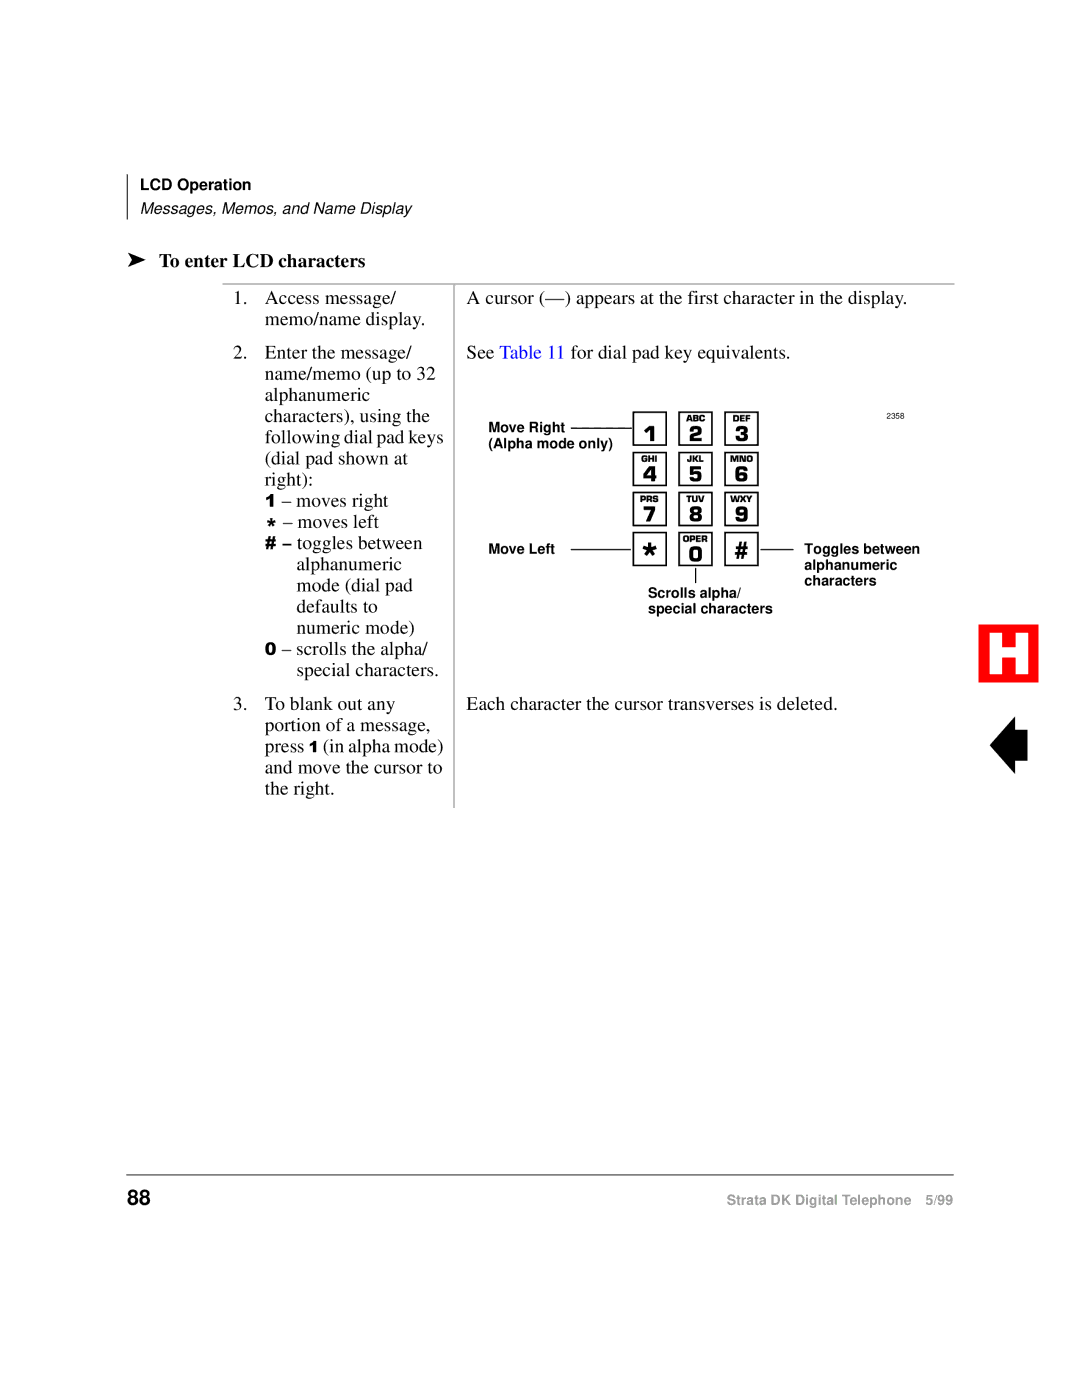 Toshiba Digital Telephone manual To enter LCD characters 